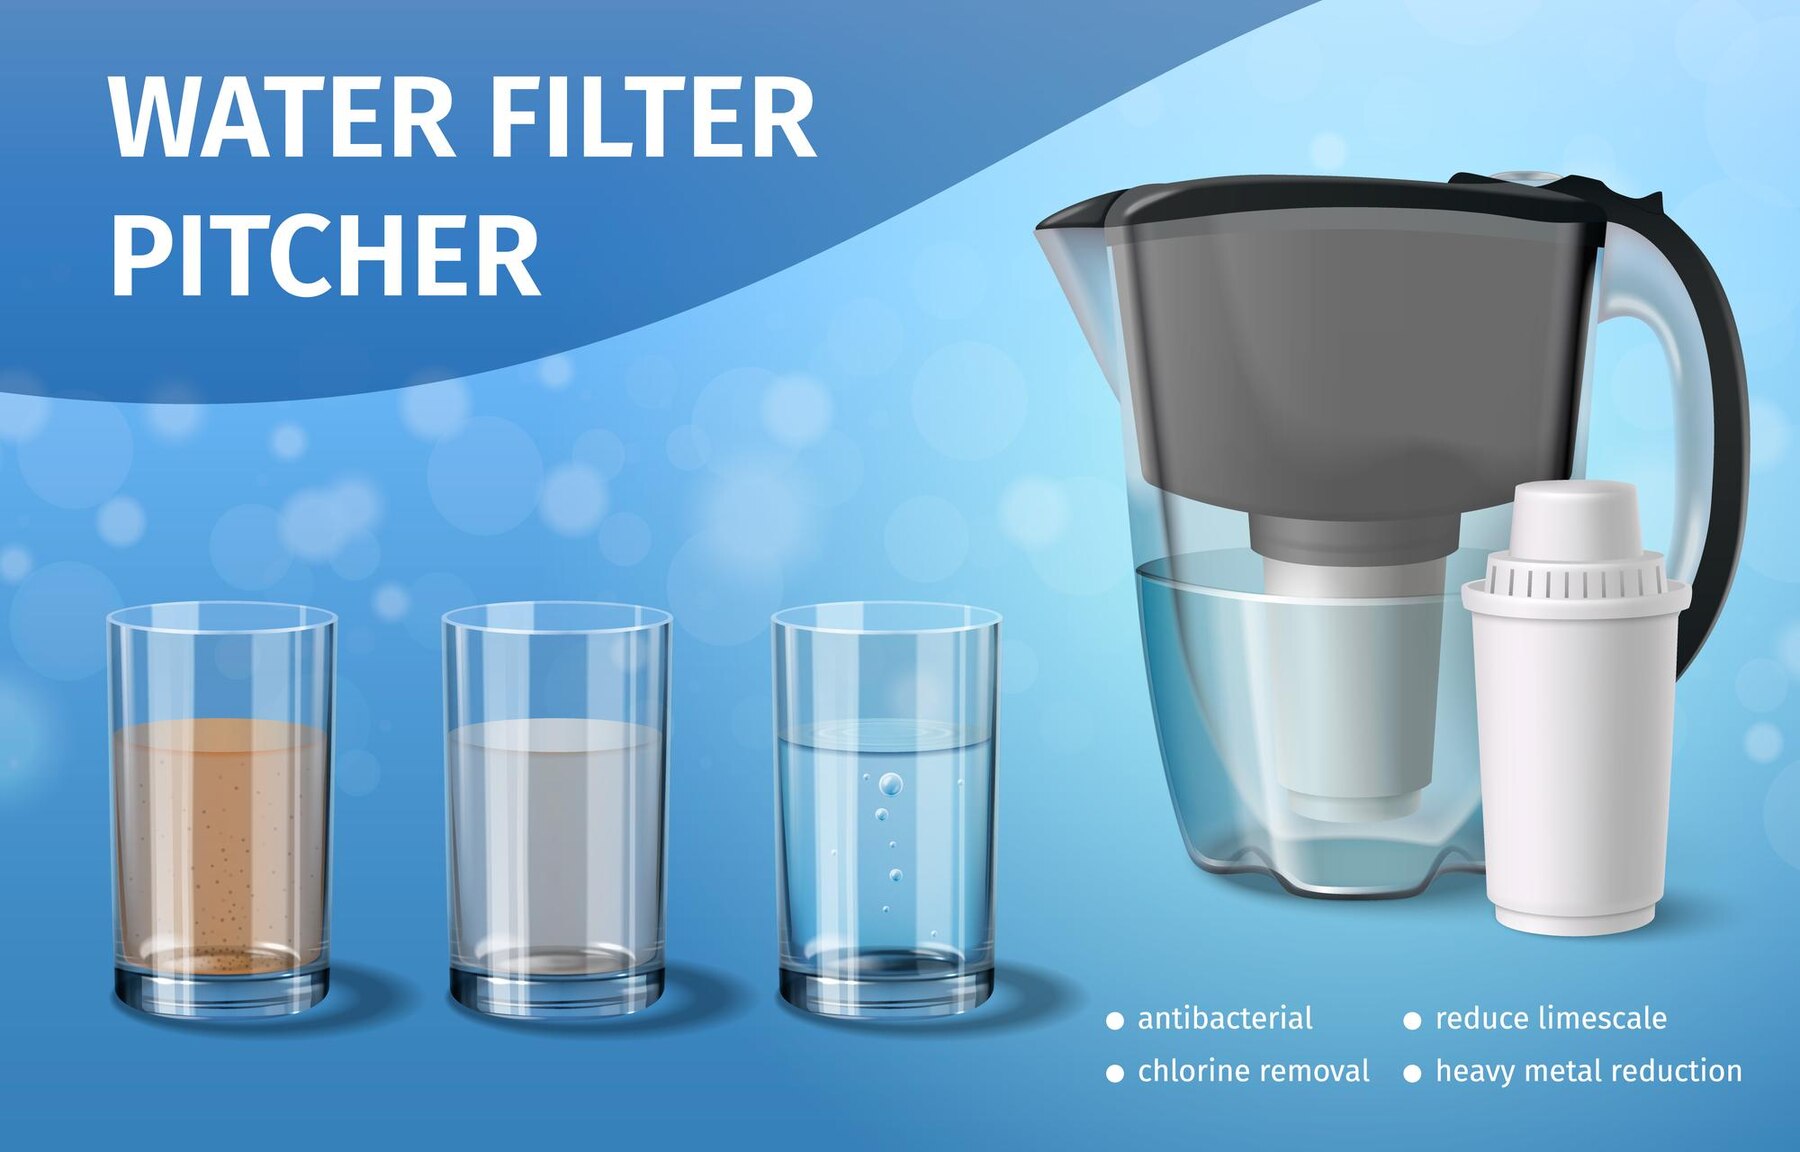 water-filter-realistic-poster-with-pitcher-and-glasses-vector-illustration_1284-76634.jpg